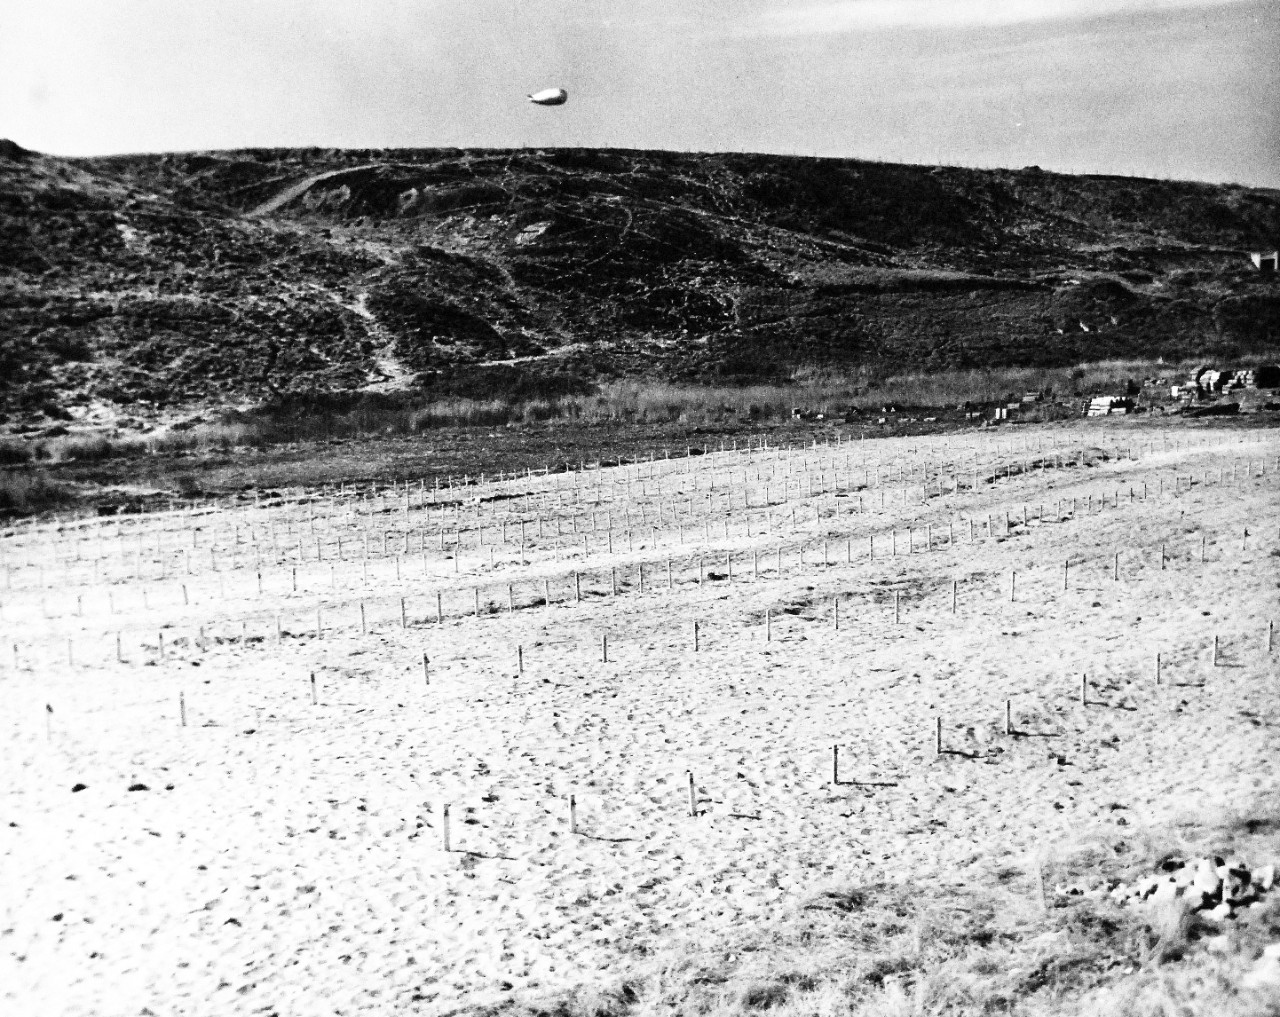 80-G-285224:  Normandy Invasion, June 1944.  Temporary graves of U.S. soldiers on Normandy Beach, France. Note barrage balloon.  Photograph released November 7, 1944.  U.S. Navy photograph, now in the collections of the National Archives.  (2016/03/15).